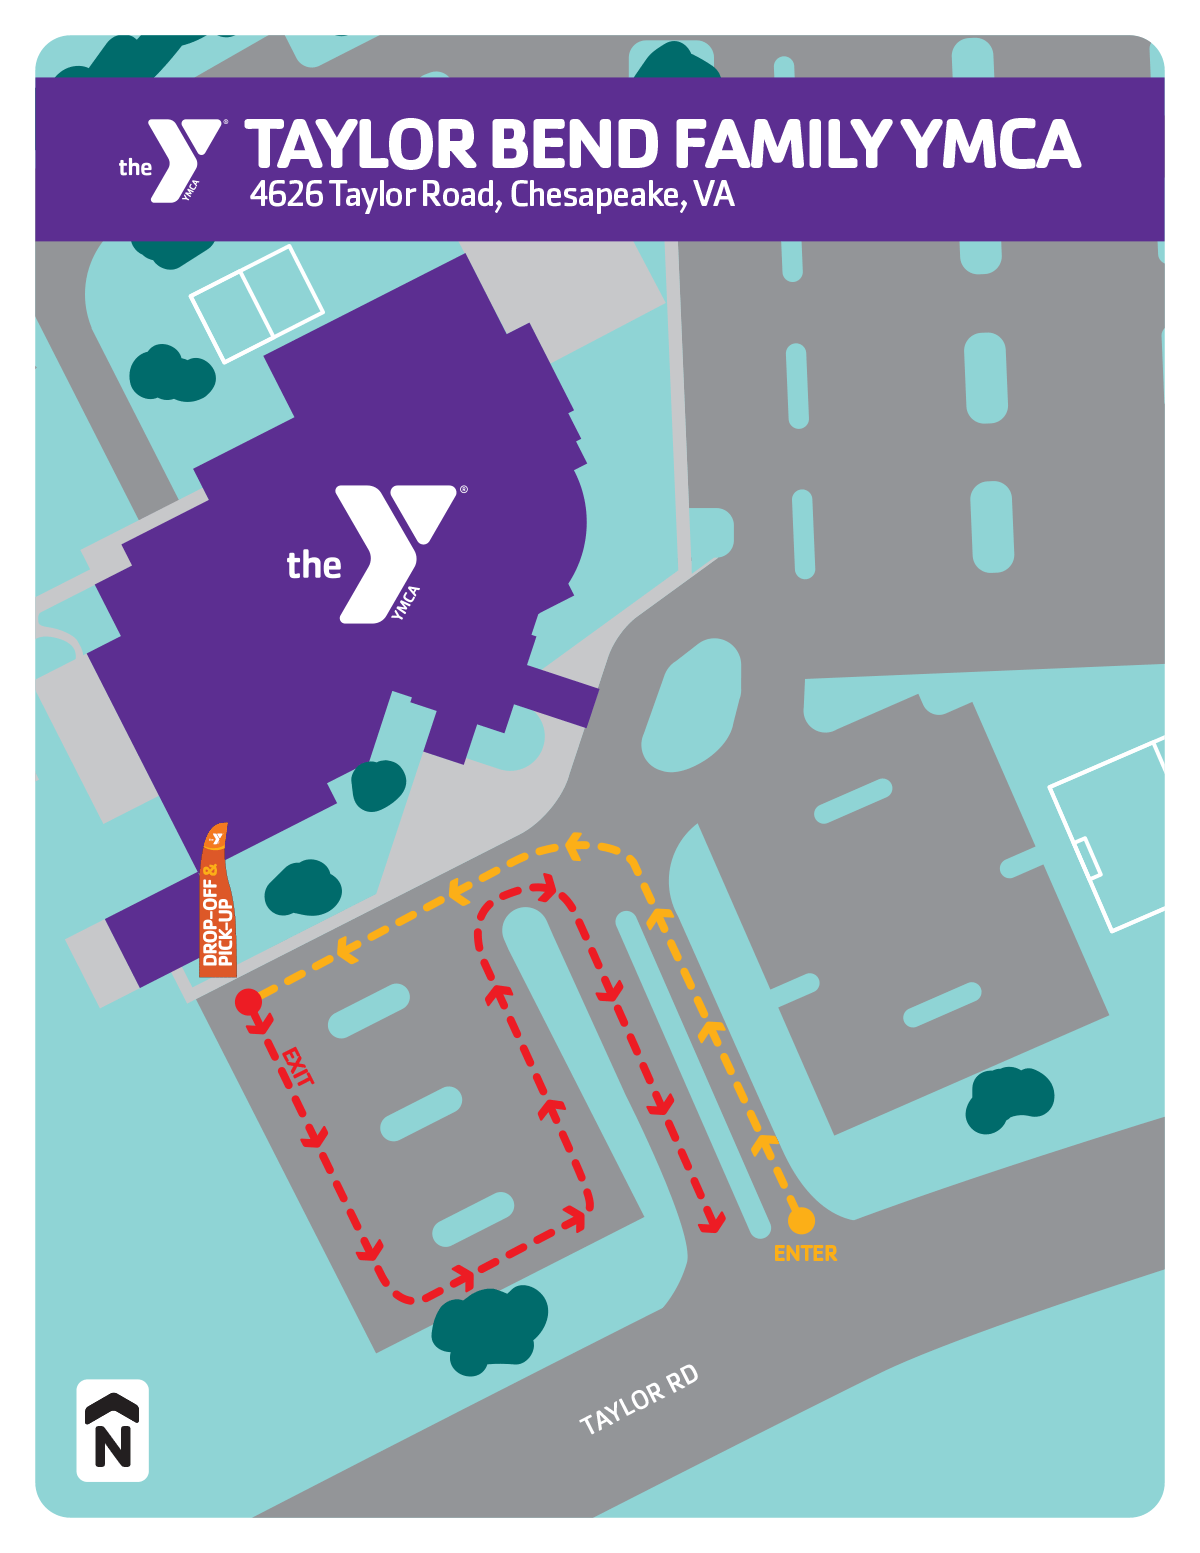 Summer camp drop-off & pick-up locations for the Taylor Bend Family YMCA